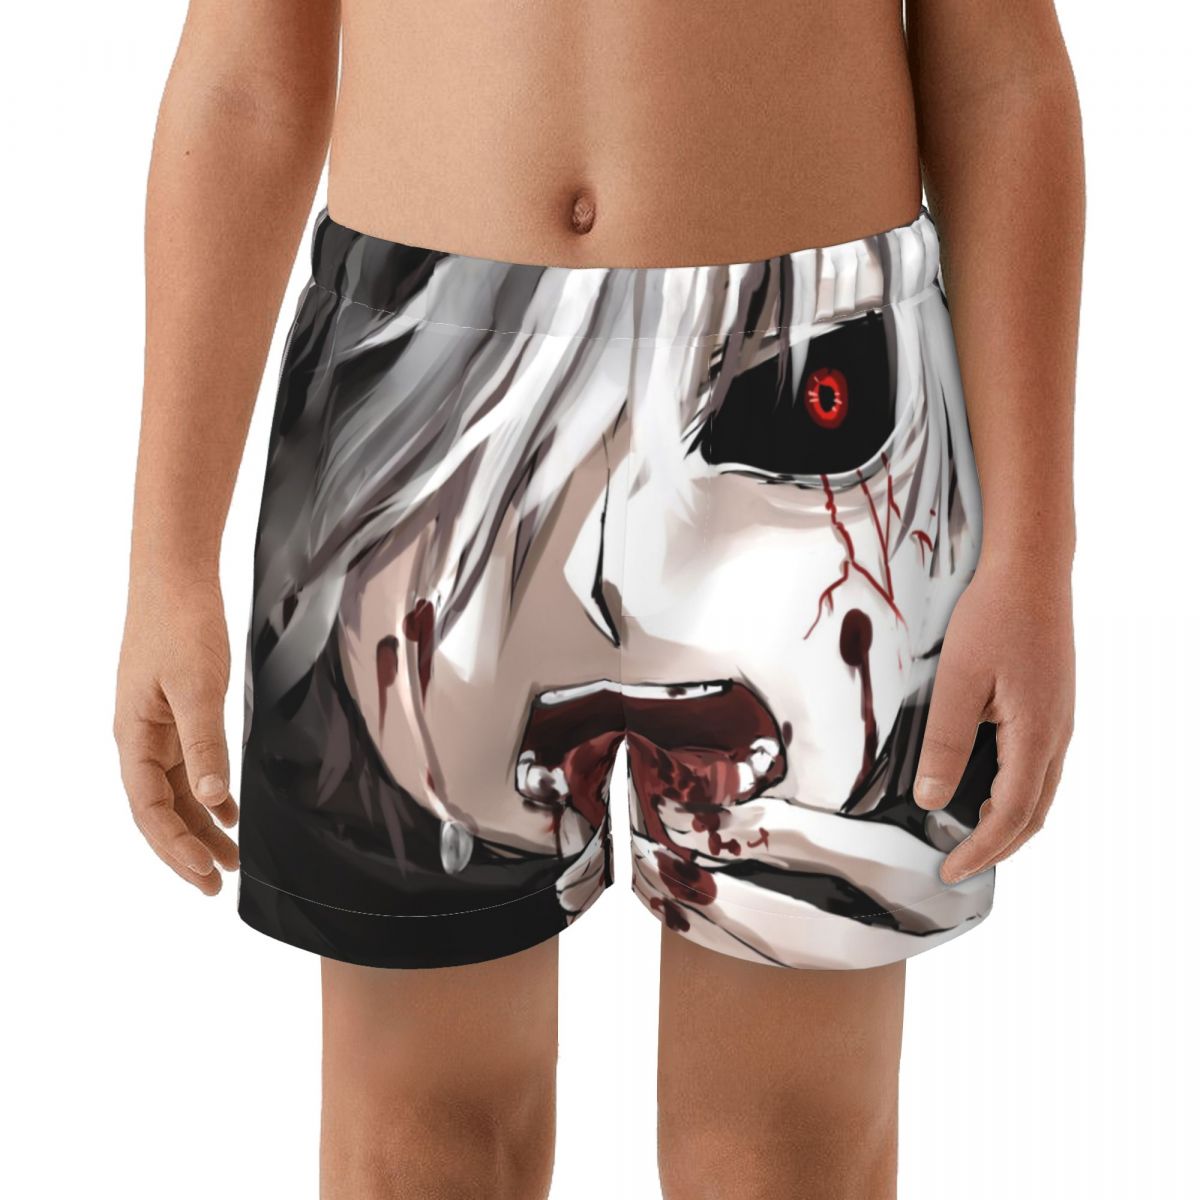 Tokyo Ghoul Hot sell swimming Trunks boy s Beach shorts Hi Q Swimwear with Pocket trunks 1 - Anime Swimsuits